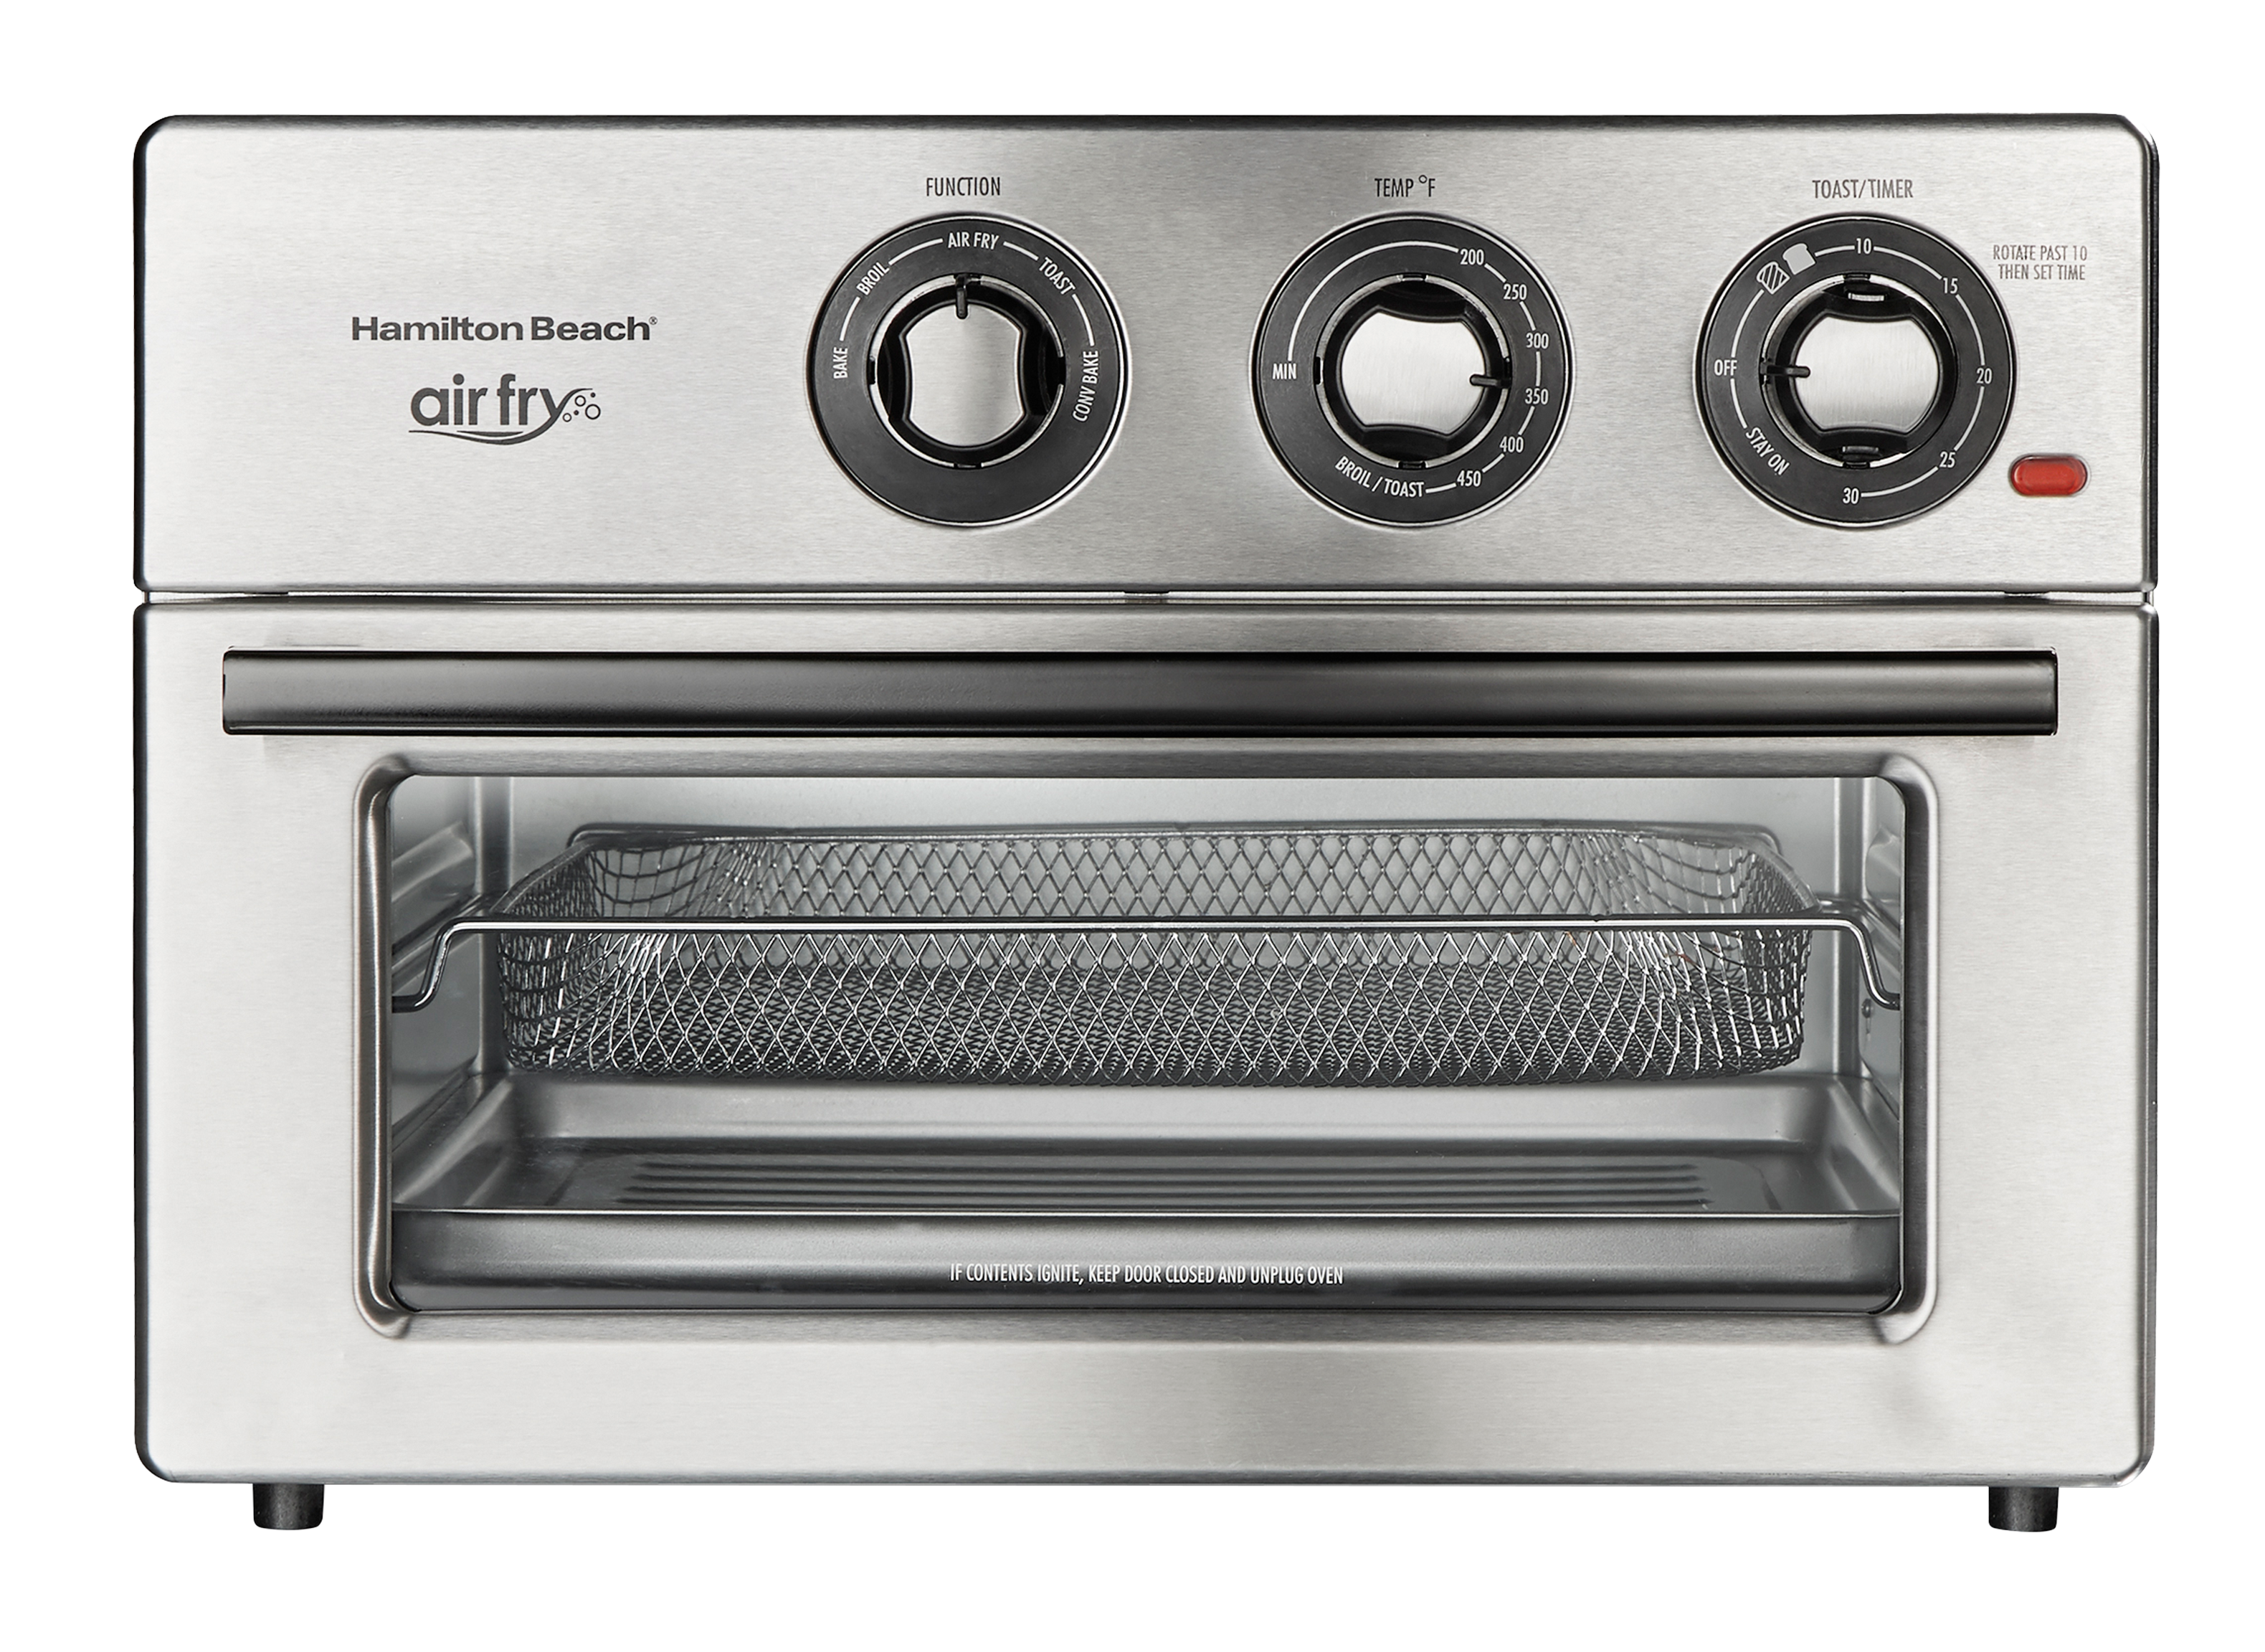 https://crdms.images.consumerreports.org/prod/products/cr/models/400897-toaster-ovens-hamilton-beach-air-fryer-convection-31225-10012265.png